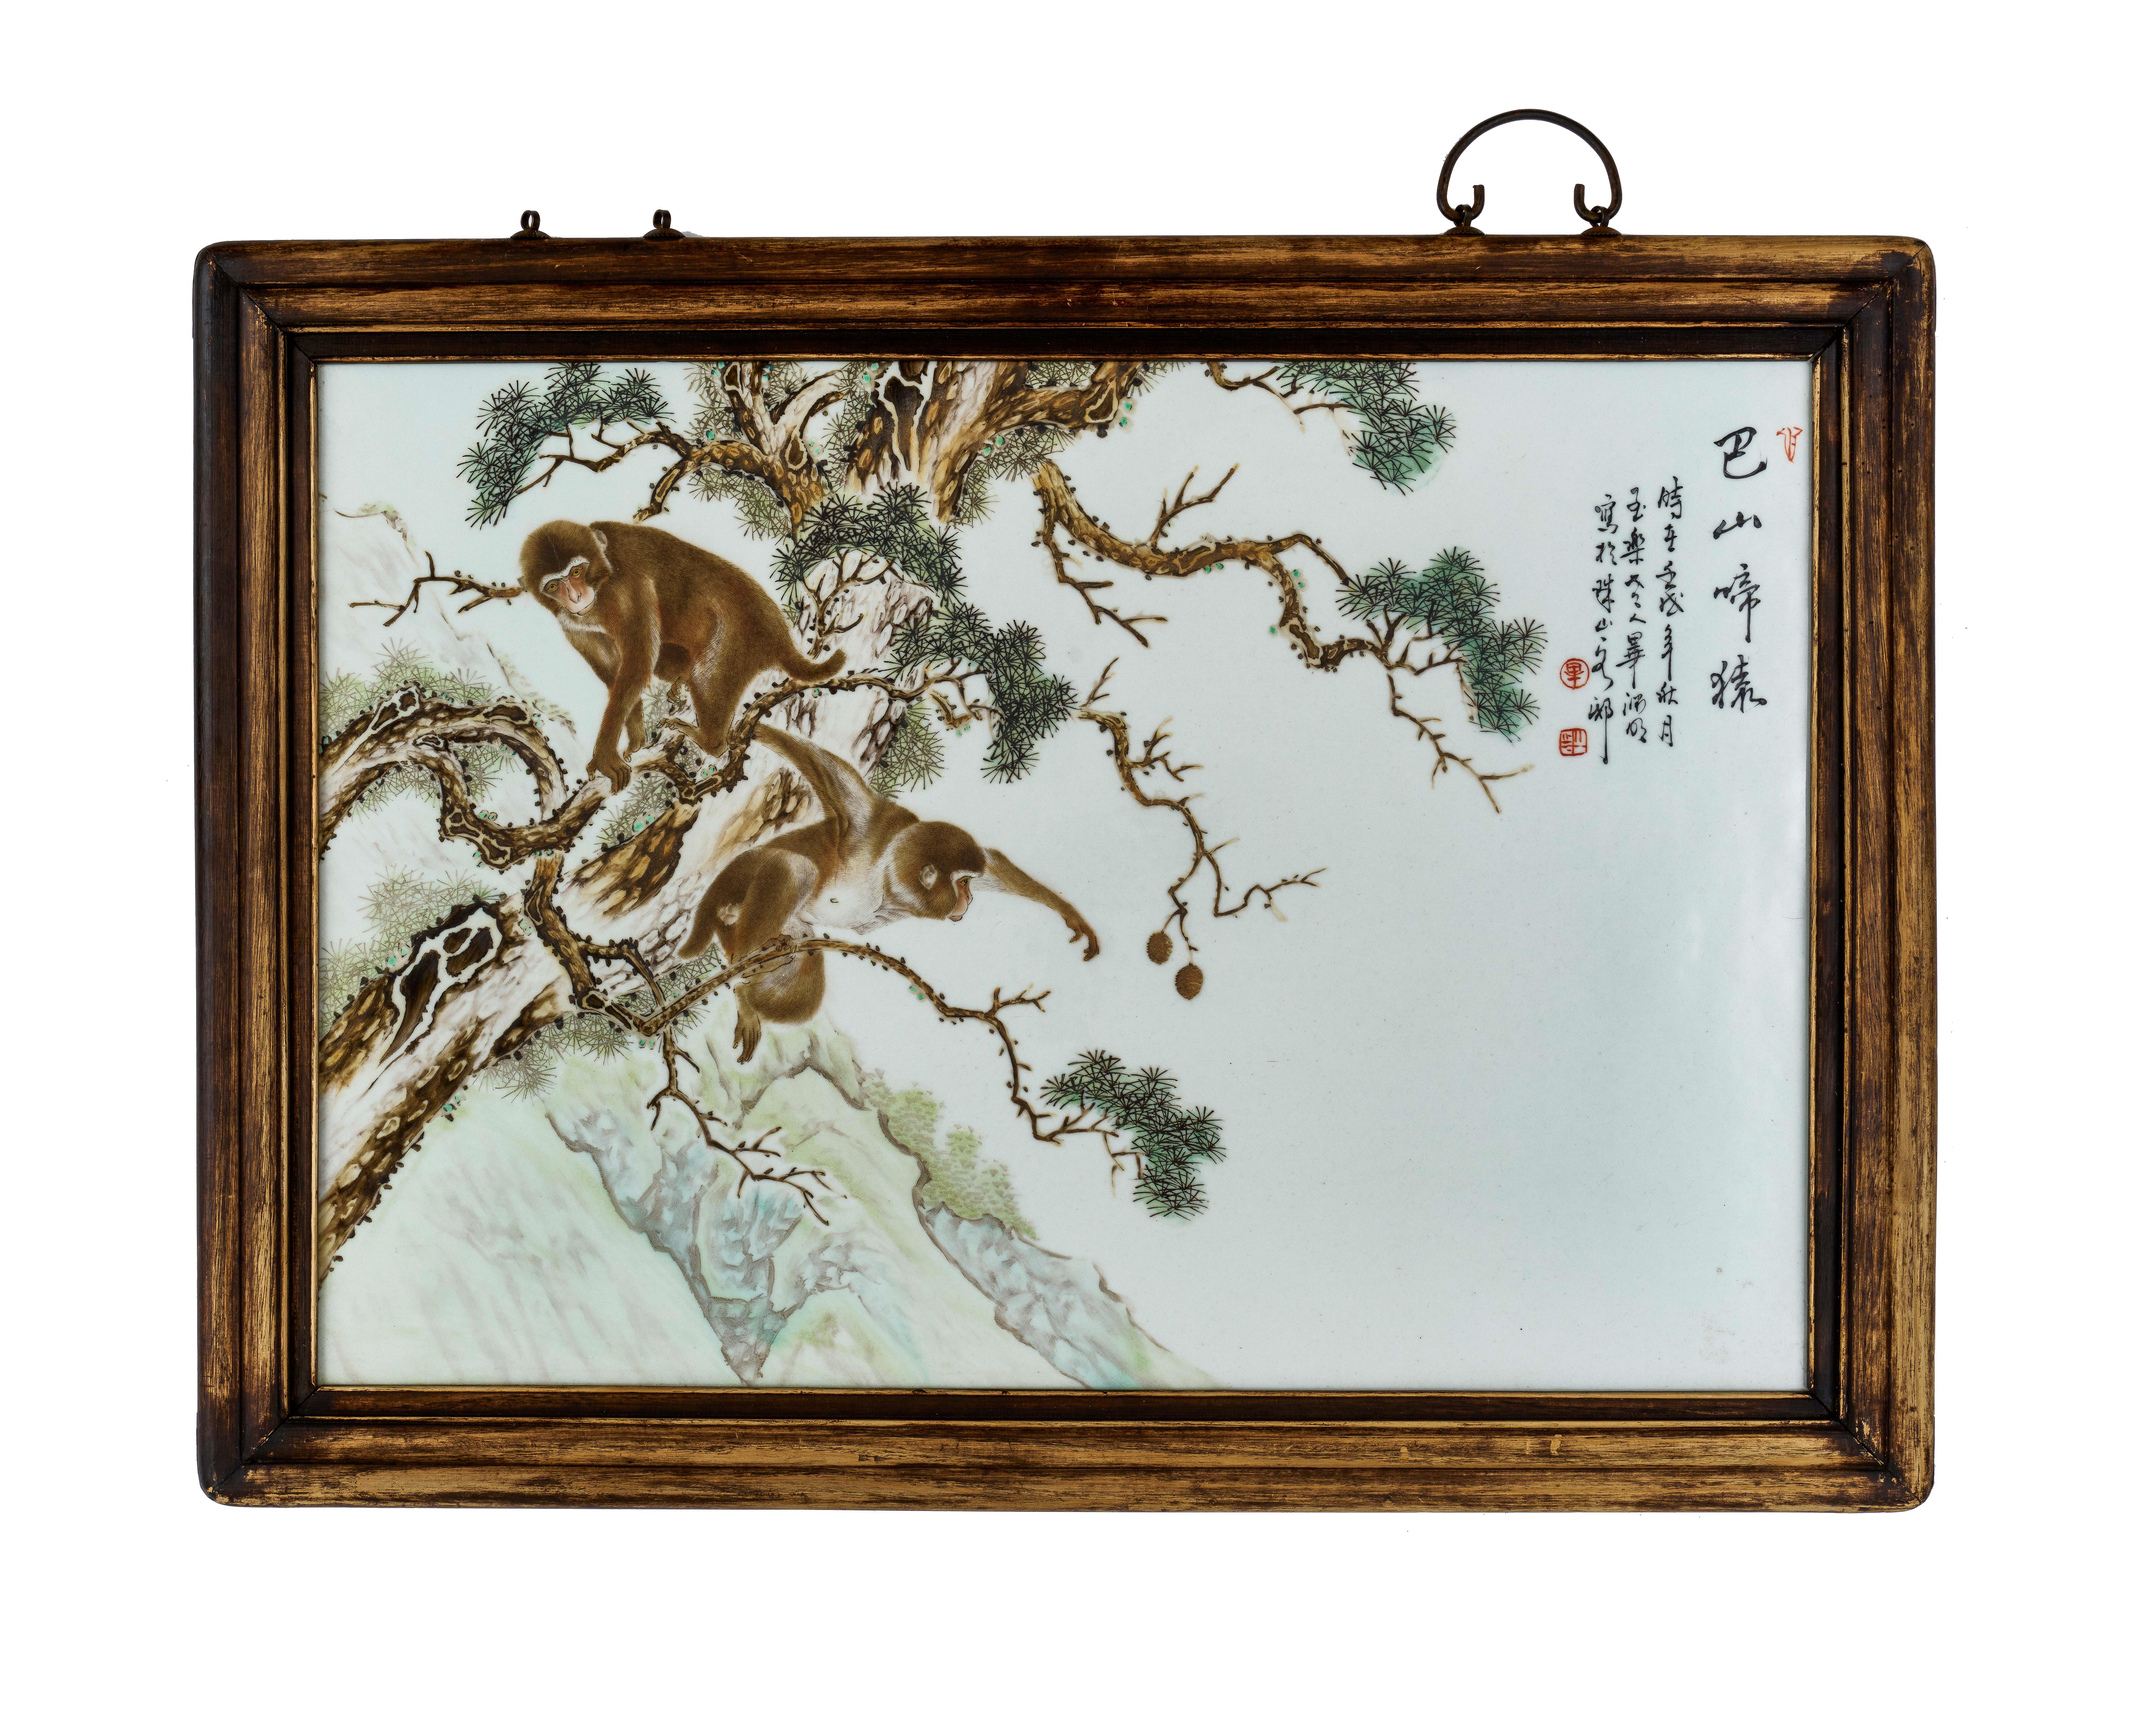 A CHINESE "MONKEYS" PLAQUE, SIGNED, REPUBLIC PERIOD